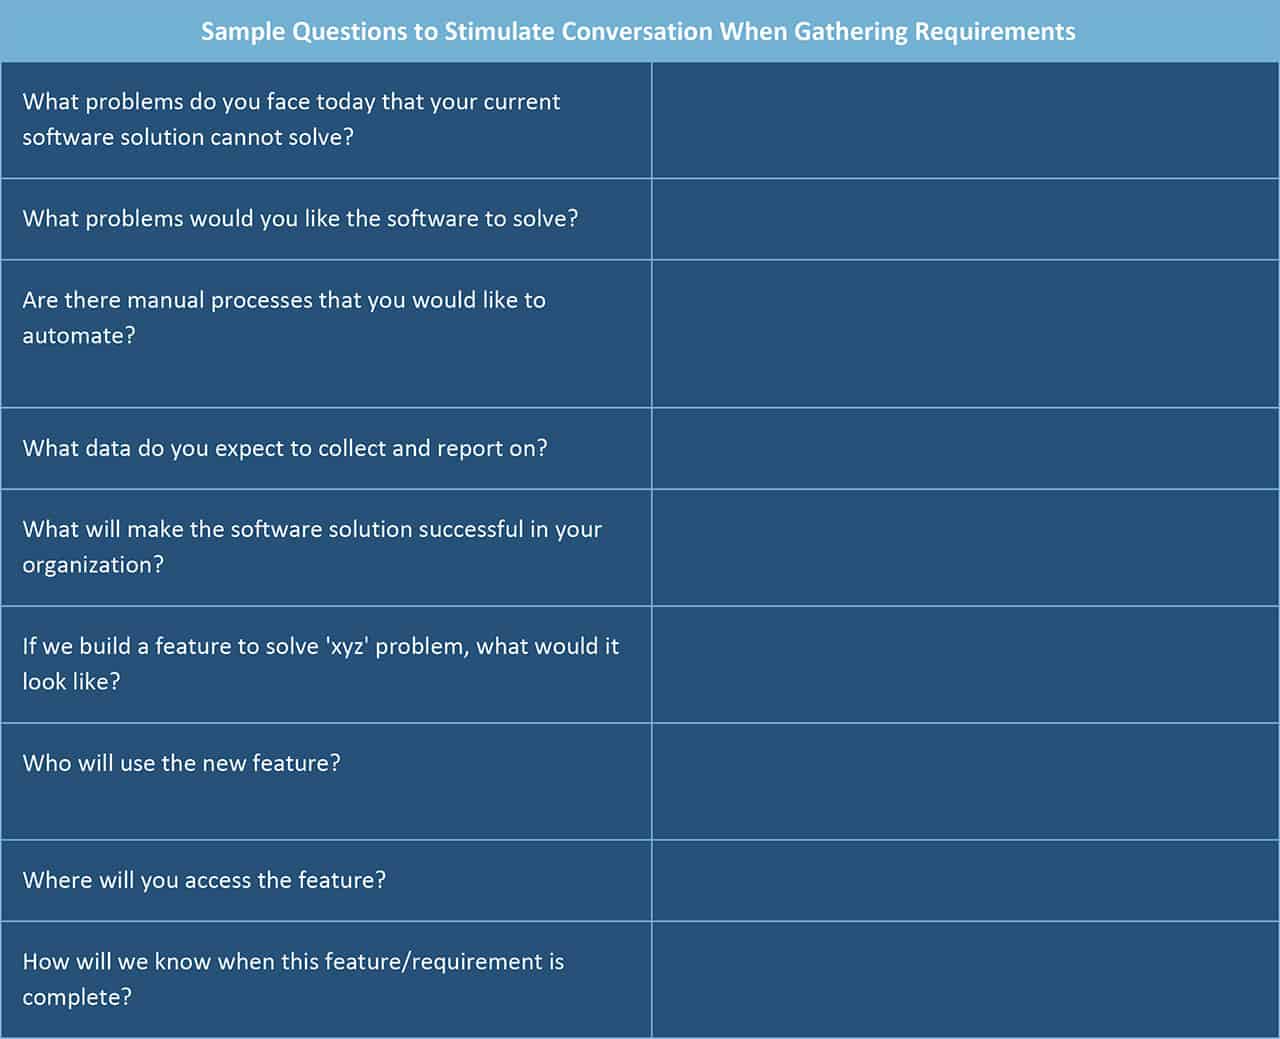 Sample questions to stimulate conversation when gathering requirements